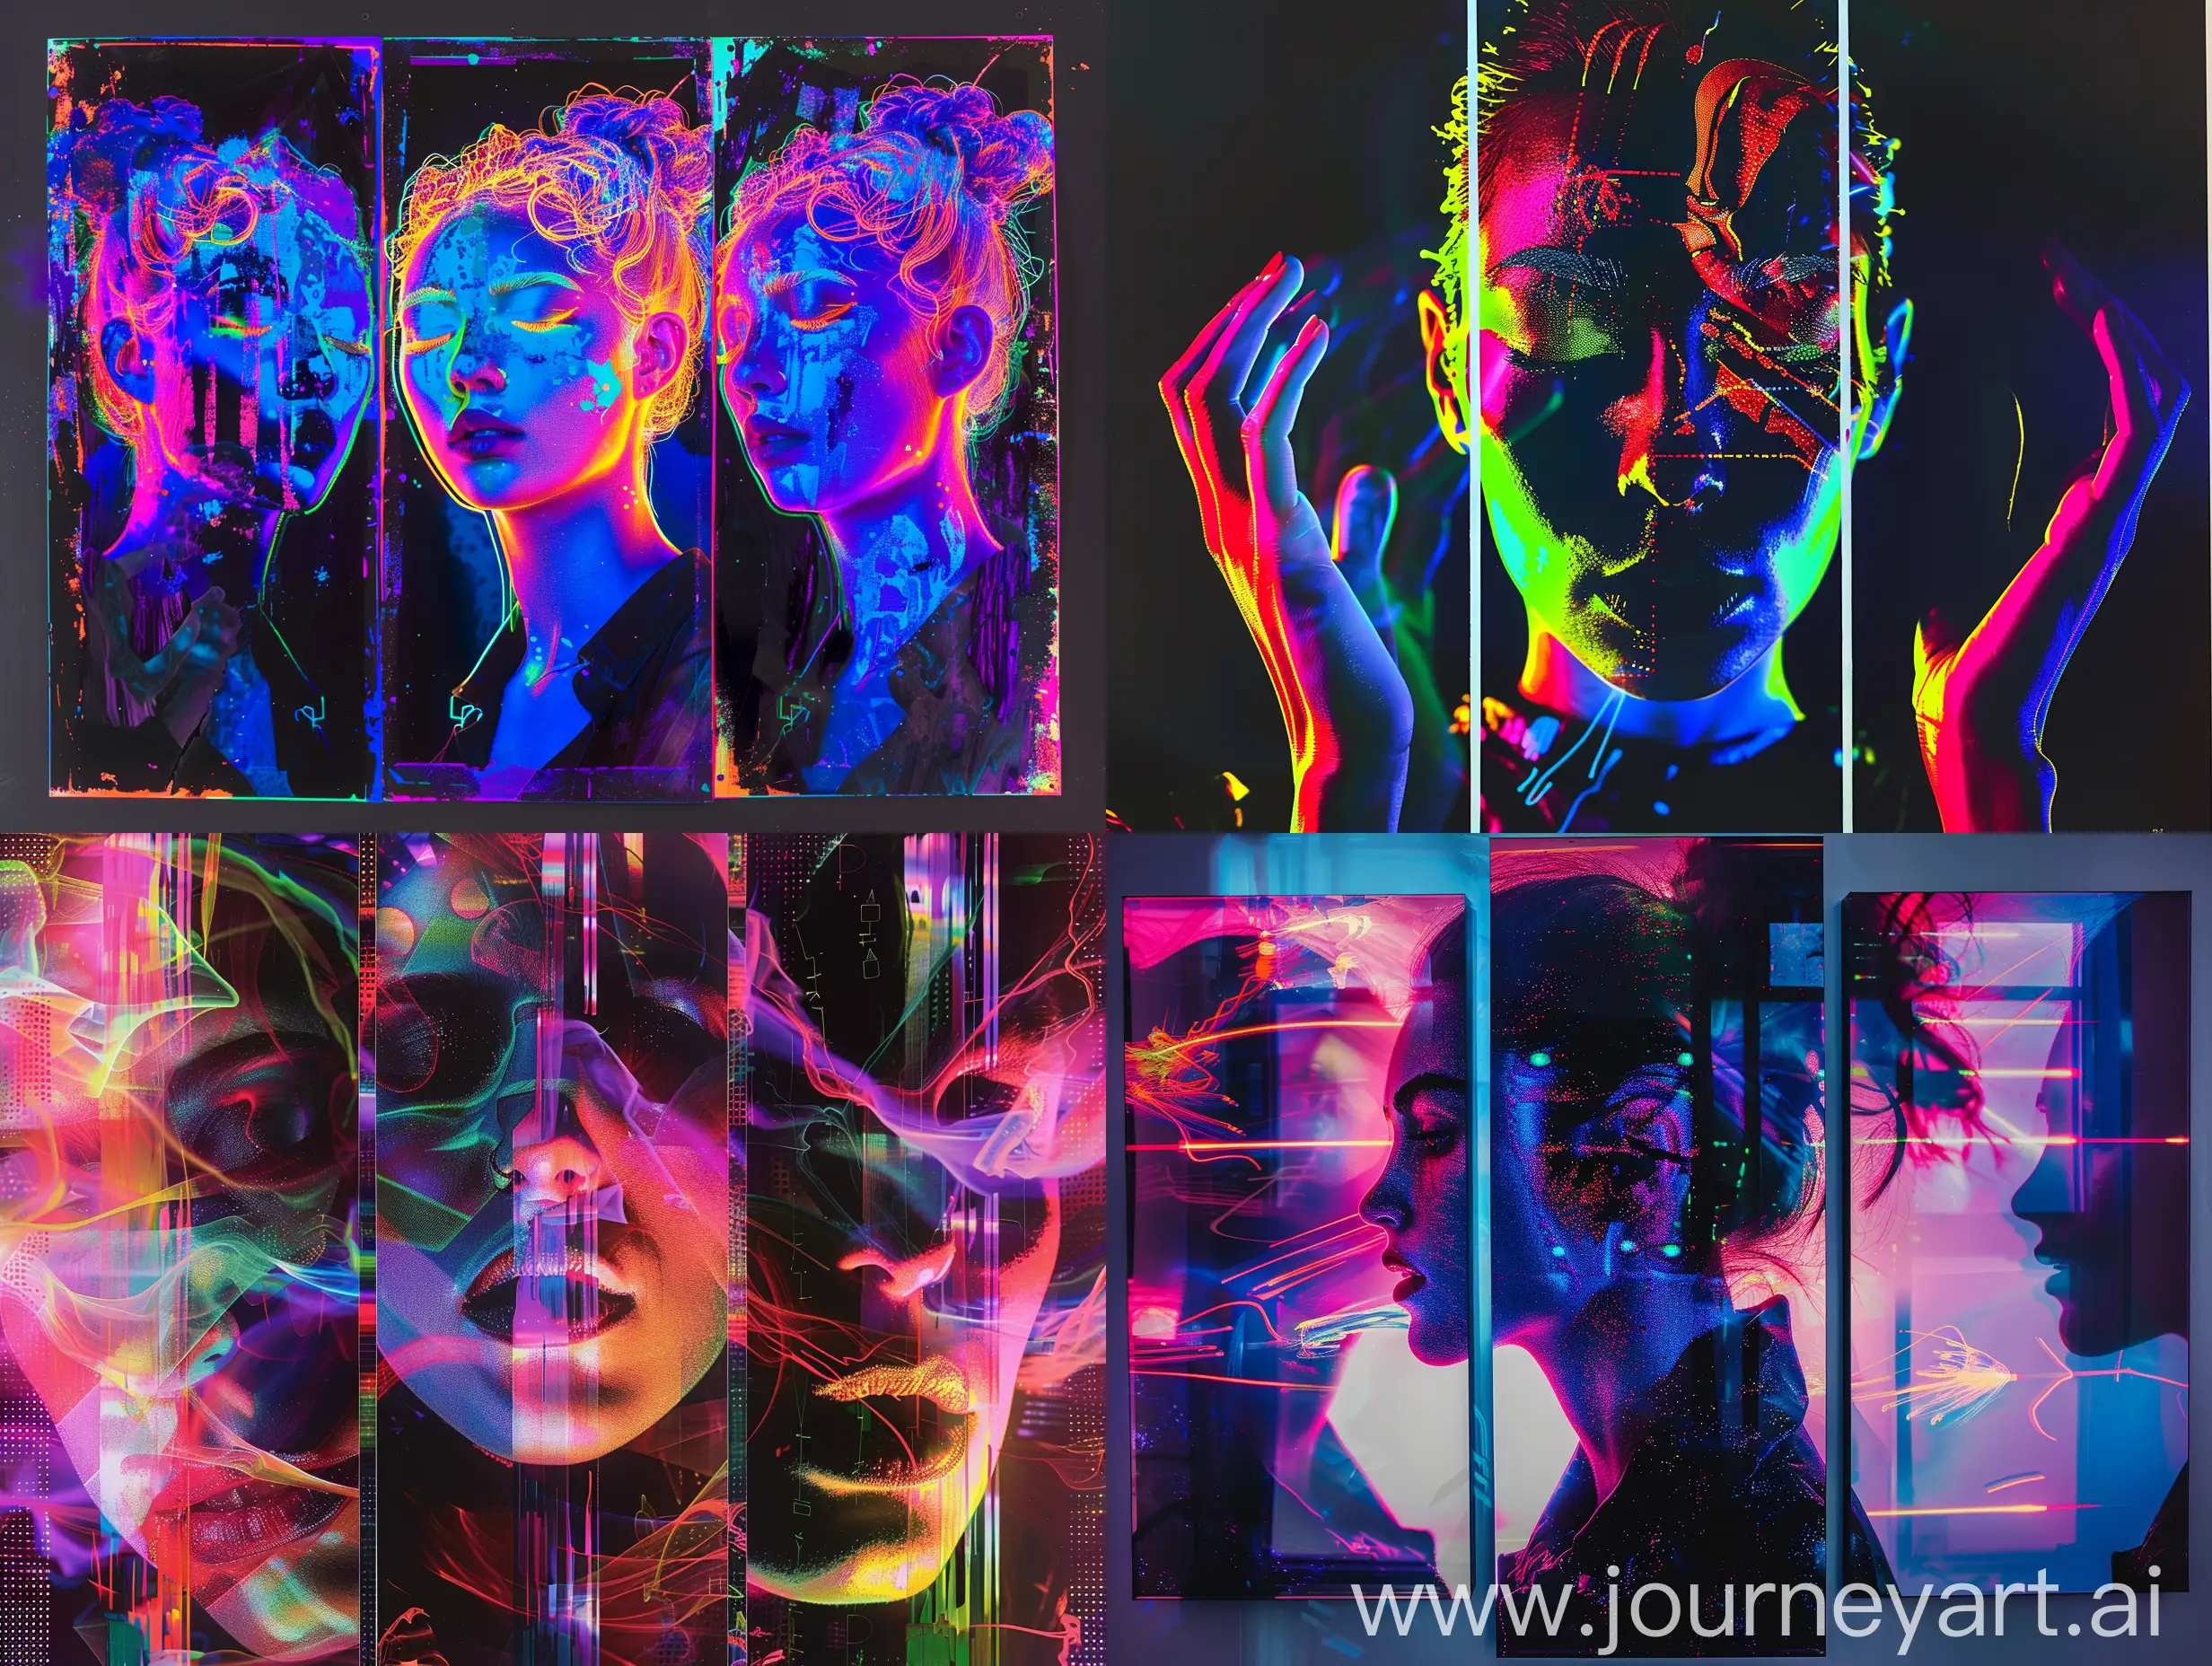 Spectra-Shifting-RetroGlitch-Portrait-Photography-with-Neon-Lighting